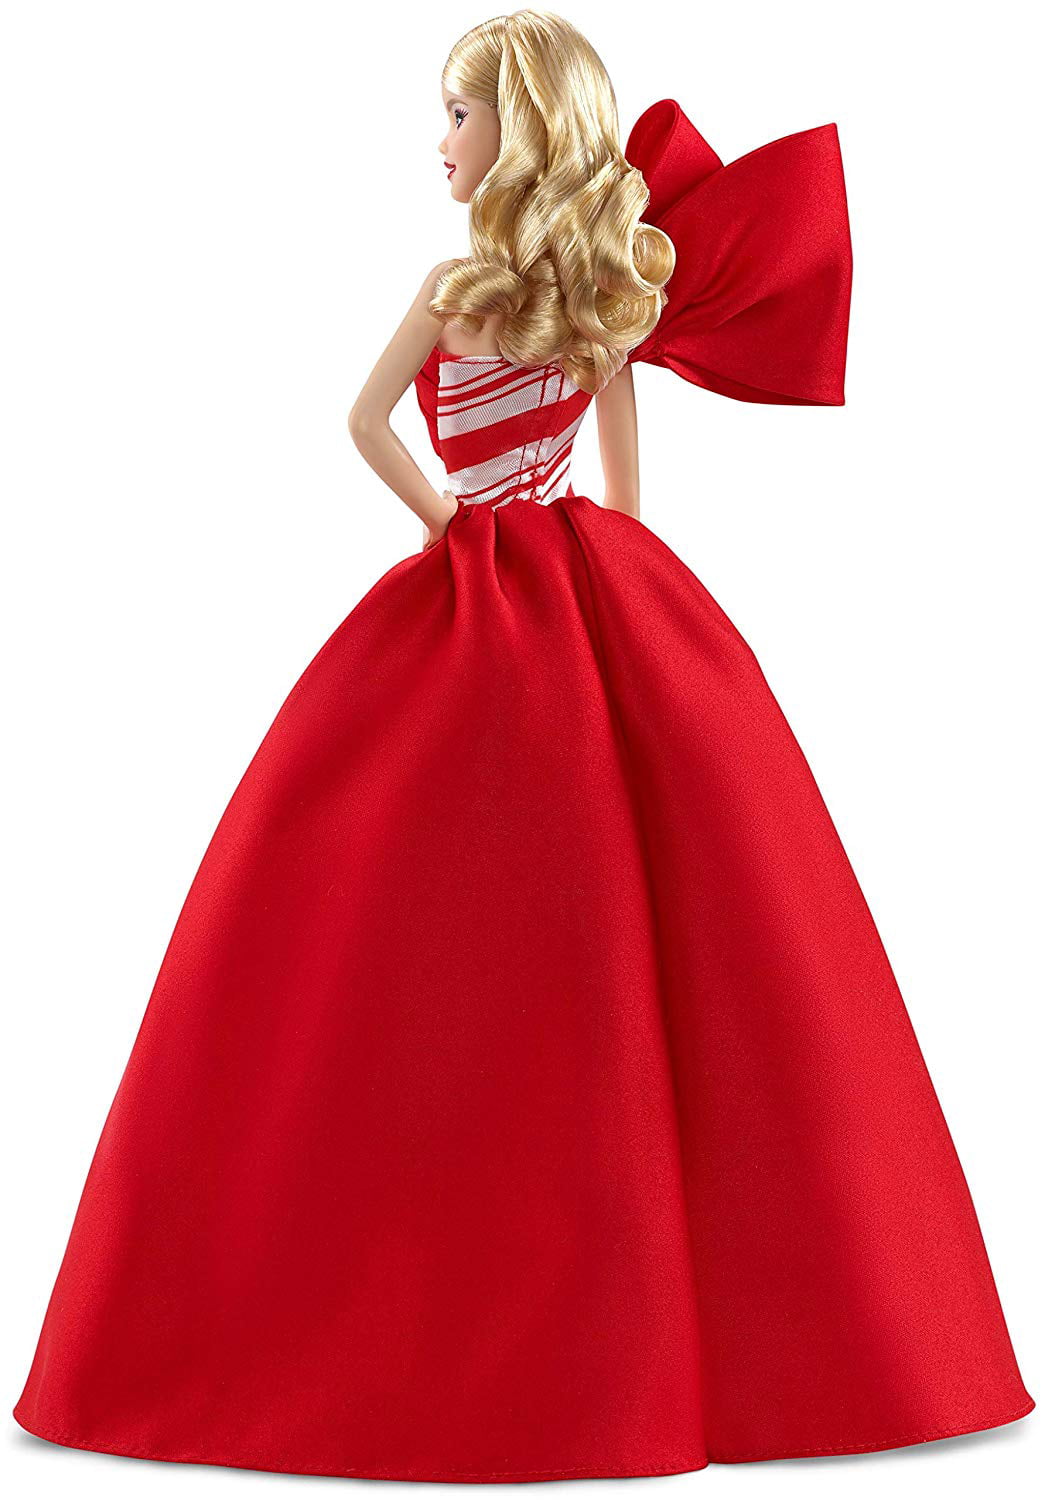 2019 Holiday Barbie Doll 